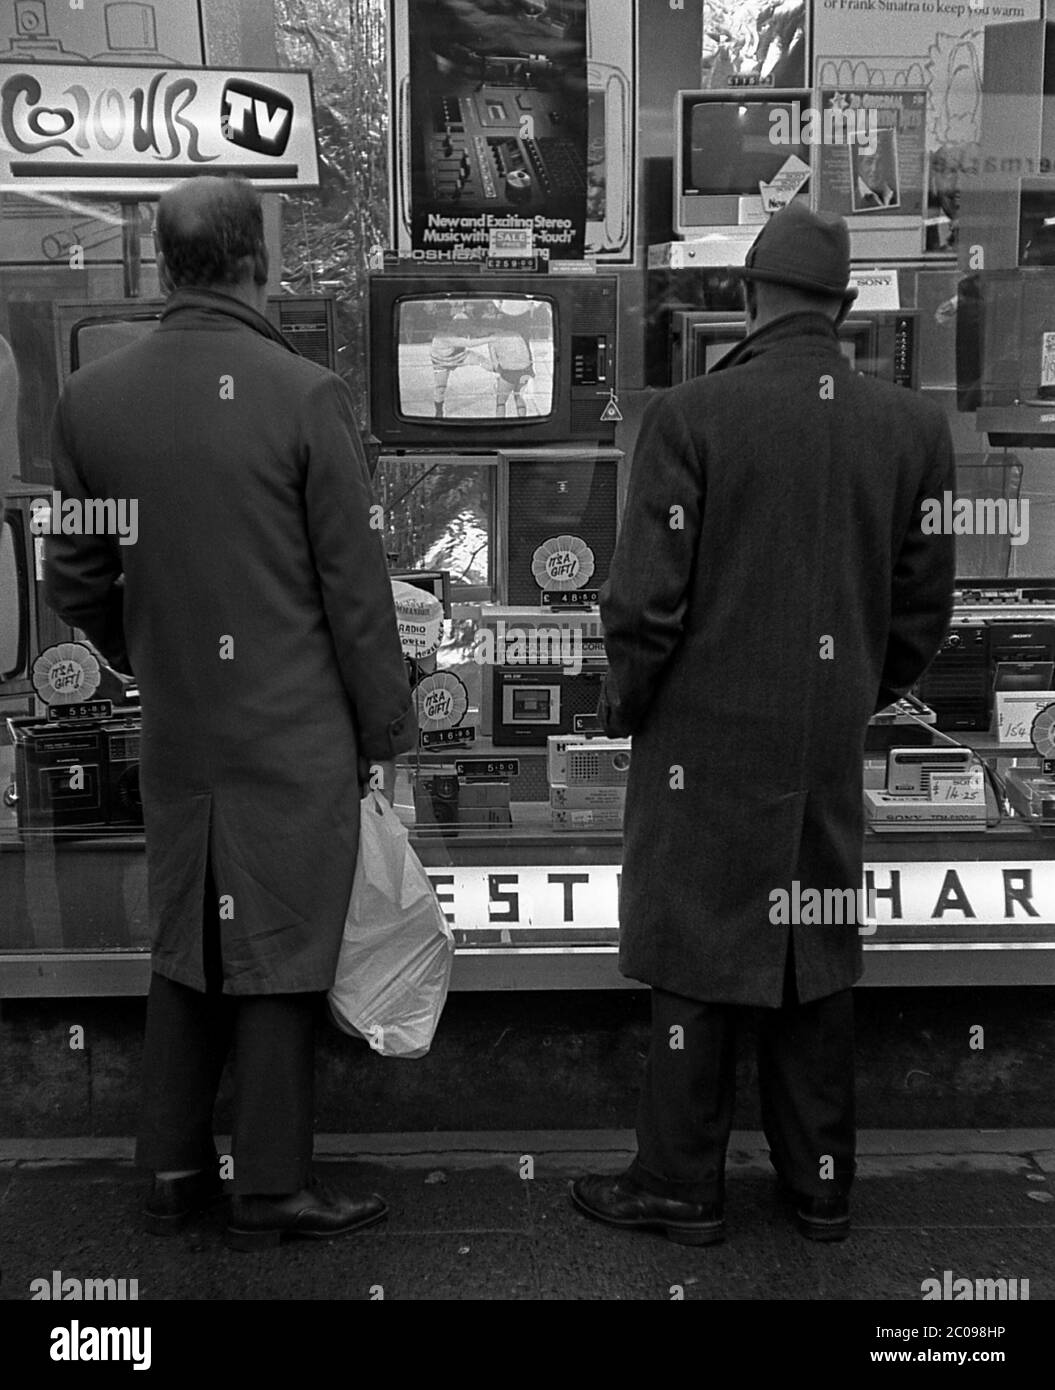 AJAXNETPHOTO. 1977. PORTSMOUTH, ENGLAND. - WINDOW SHOPPING - TWO MEN LOOKING AT DISPLAY OF GOODS IN WINDOW OF ELECTRICAL RETAILER IN LONDON ROAD NORTH END WHEN PRICE OF A COLOUR TELEVISION WAS £259.00 AND RADIO CASSETTE RECORDER £48.50.   PHOTO:JONATHAN EASTLAND/AJAX REF:35773A36 Stock Photo